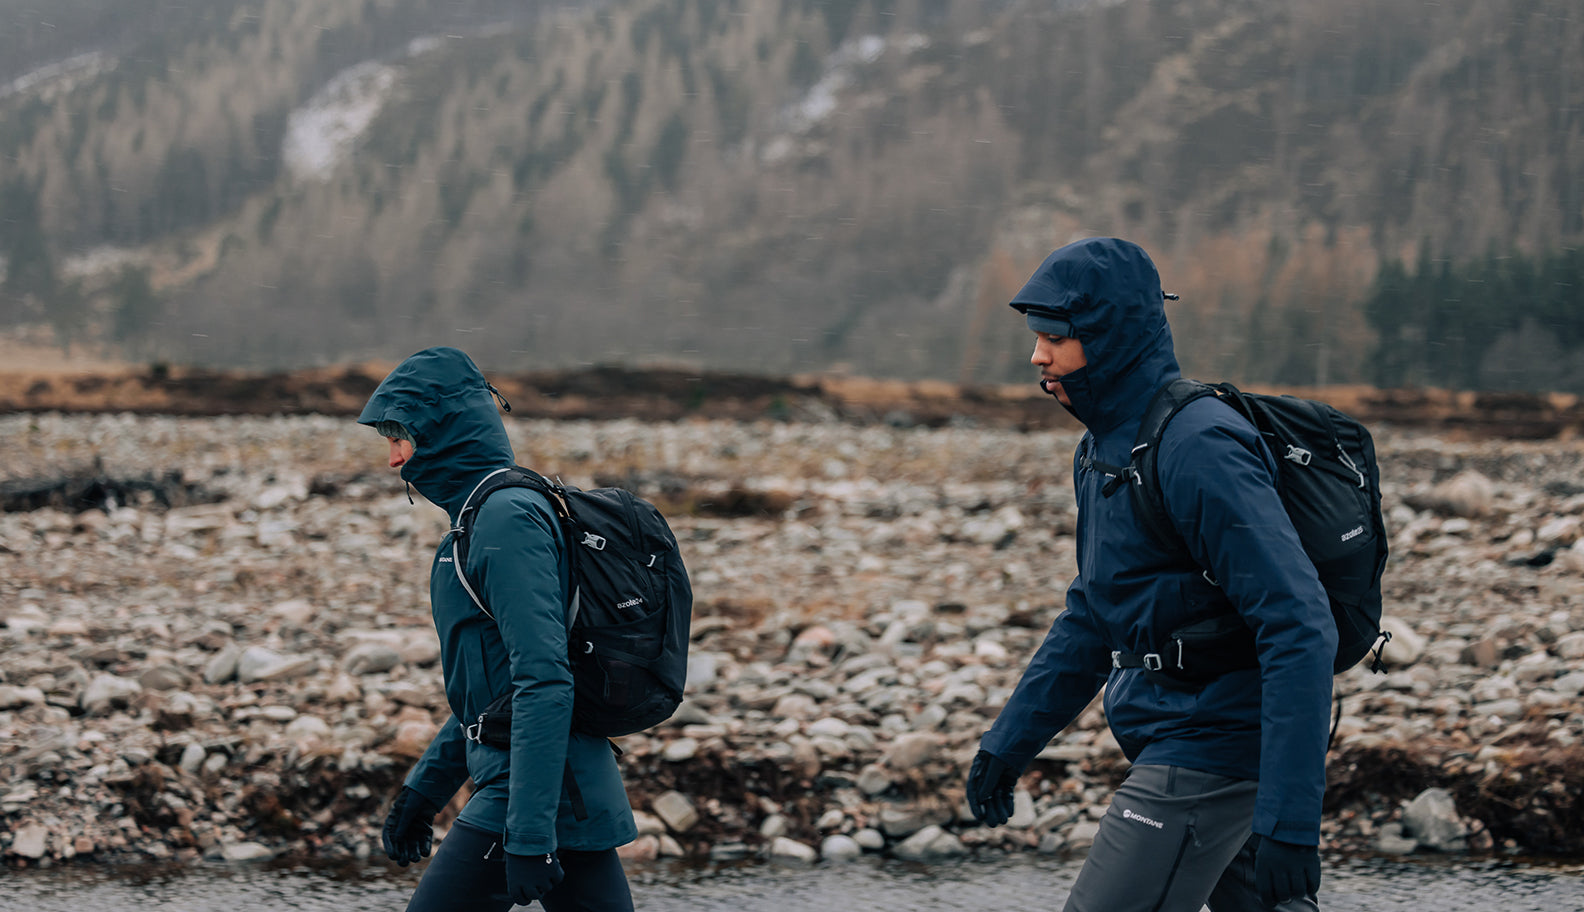 Prepare for wet weather with Montane Waterproof jackets